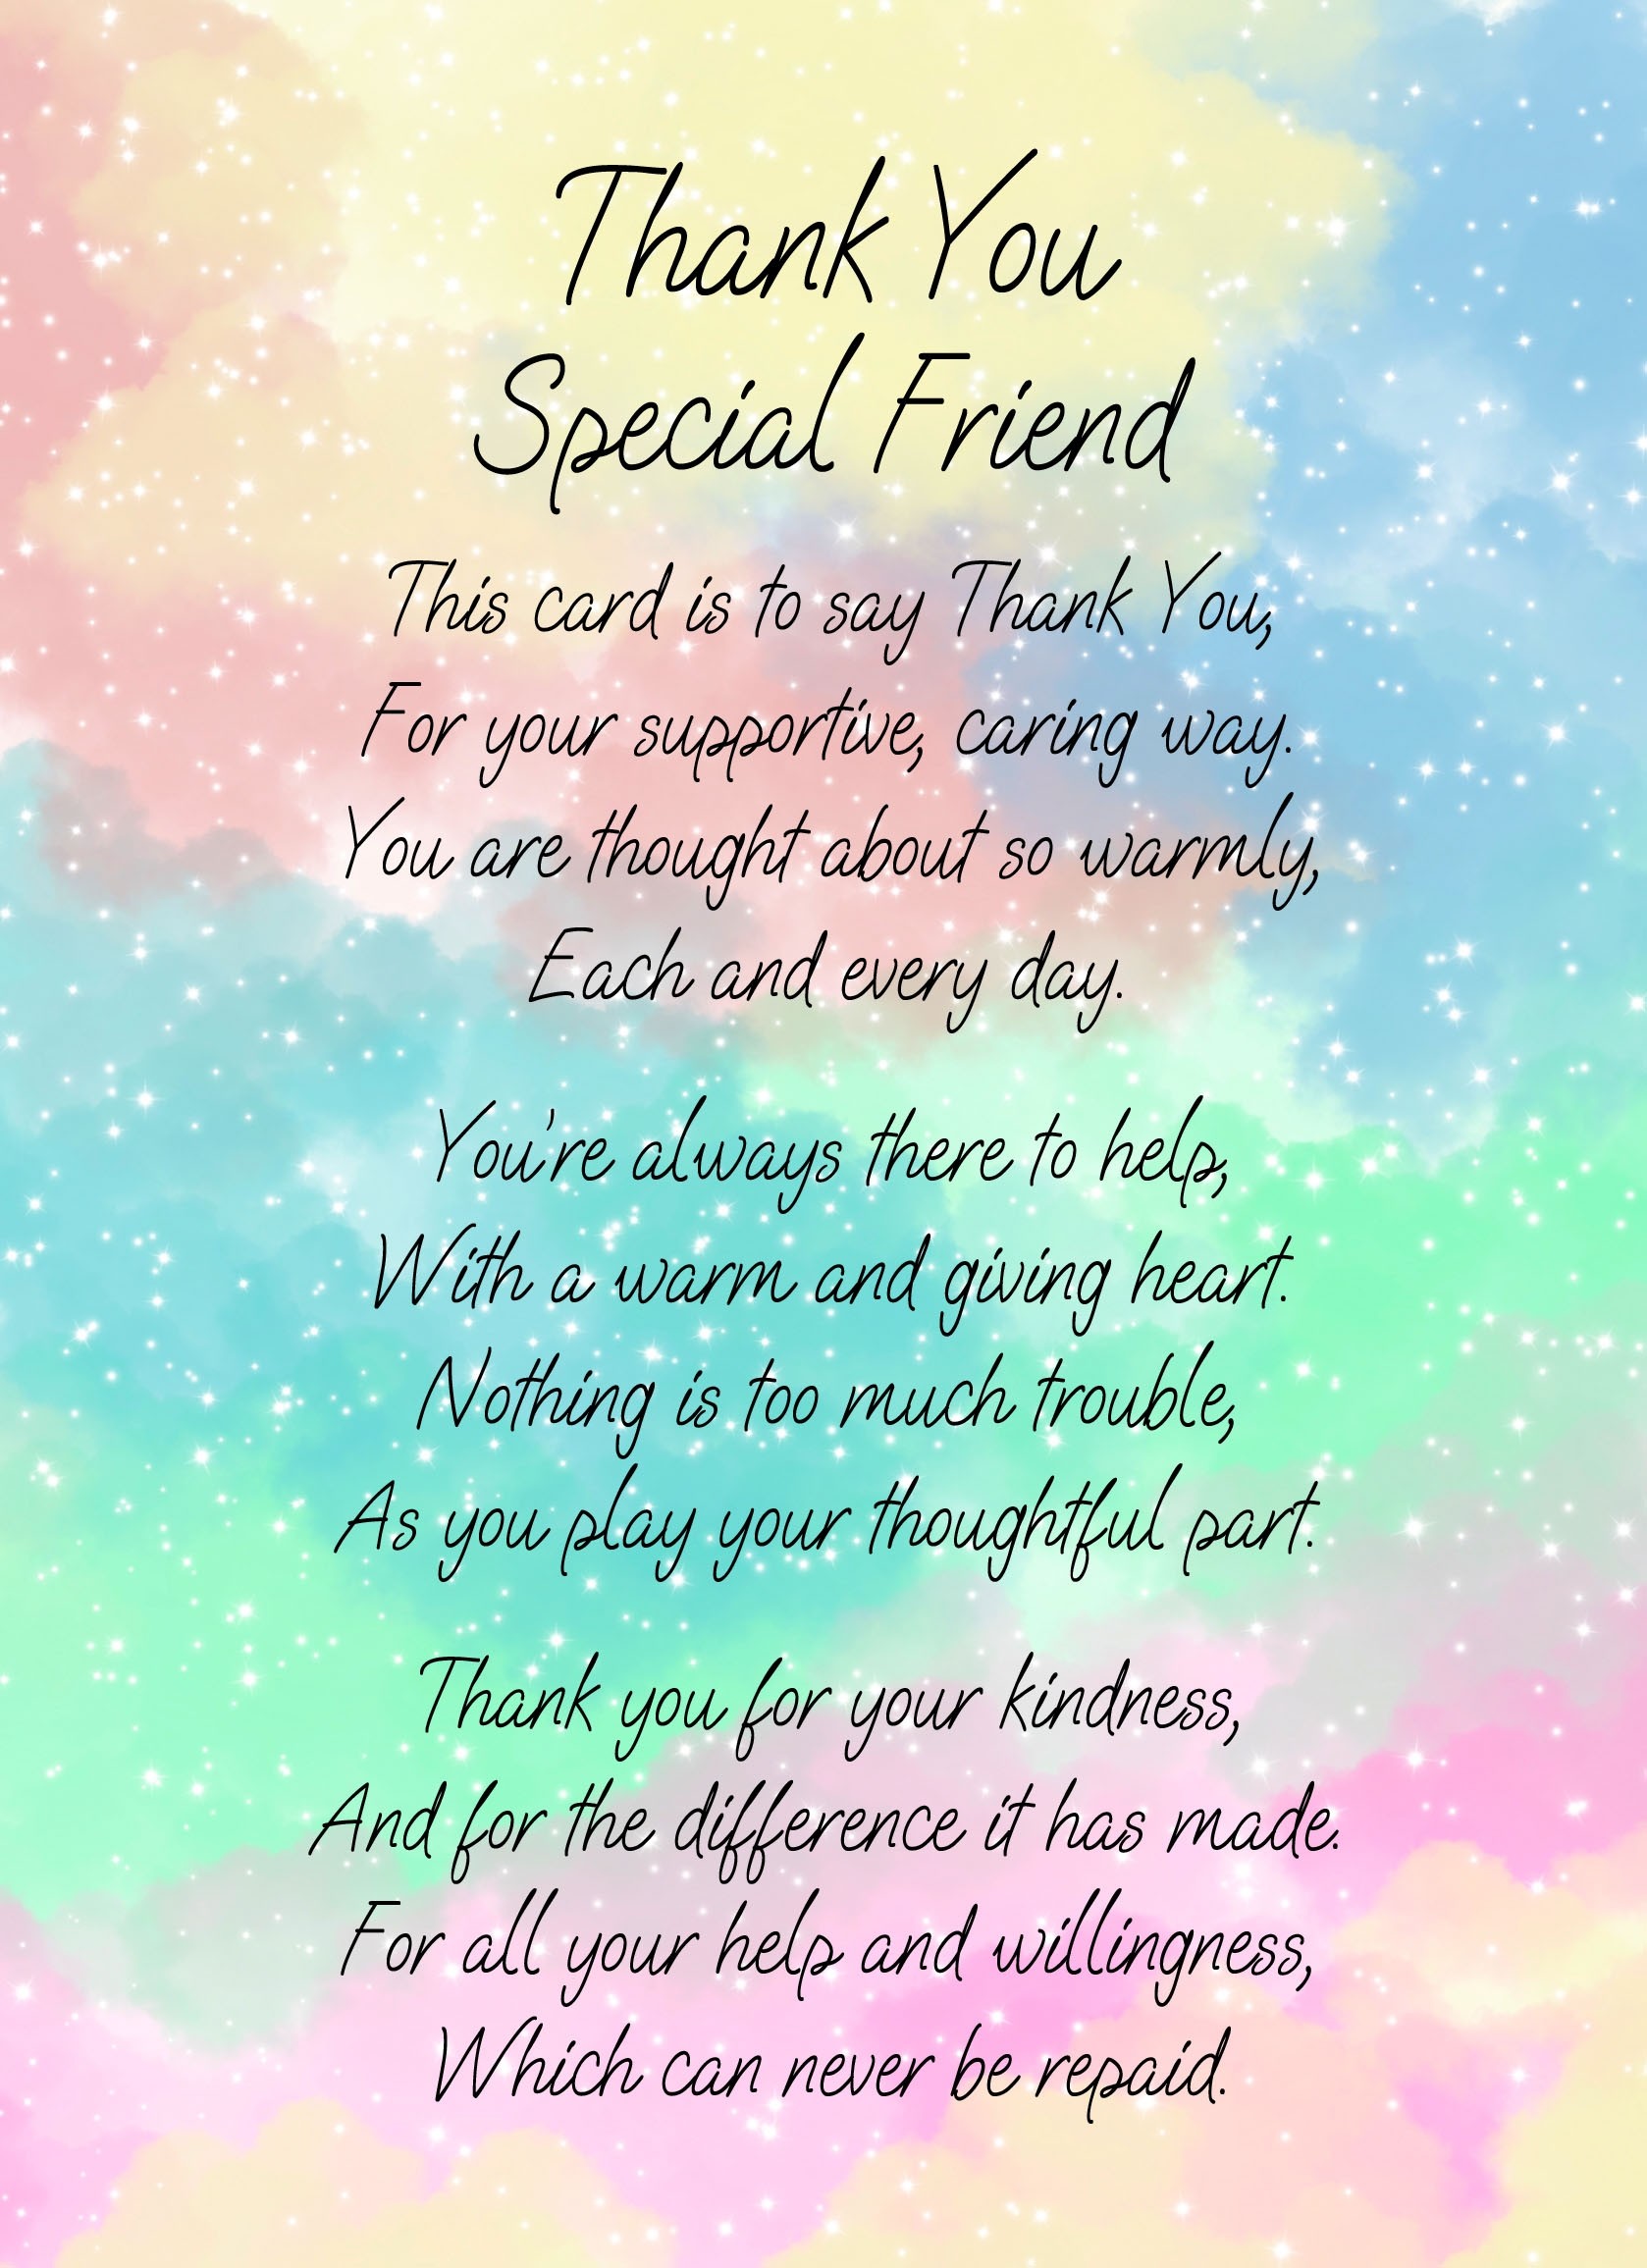 Thank You Poem Verse Card For Special Friend